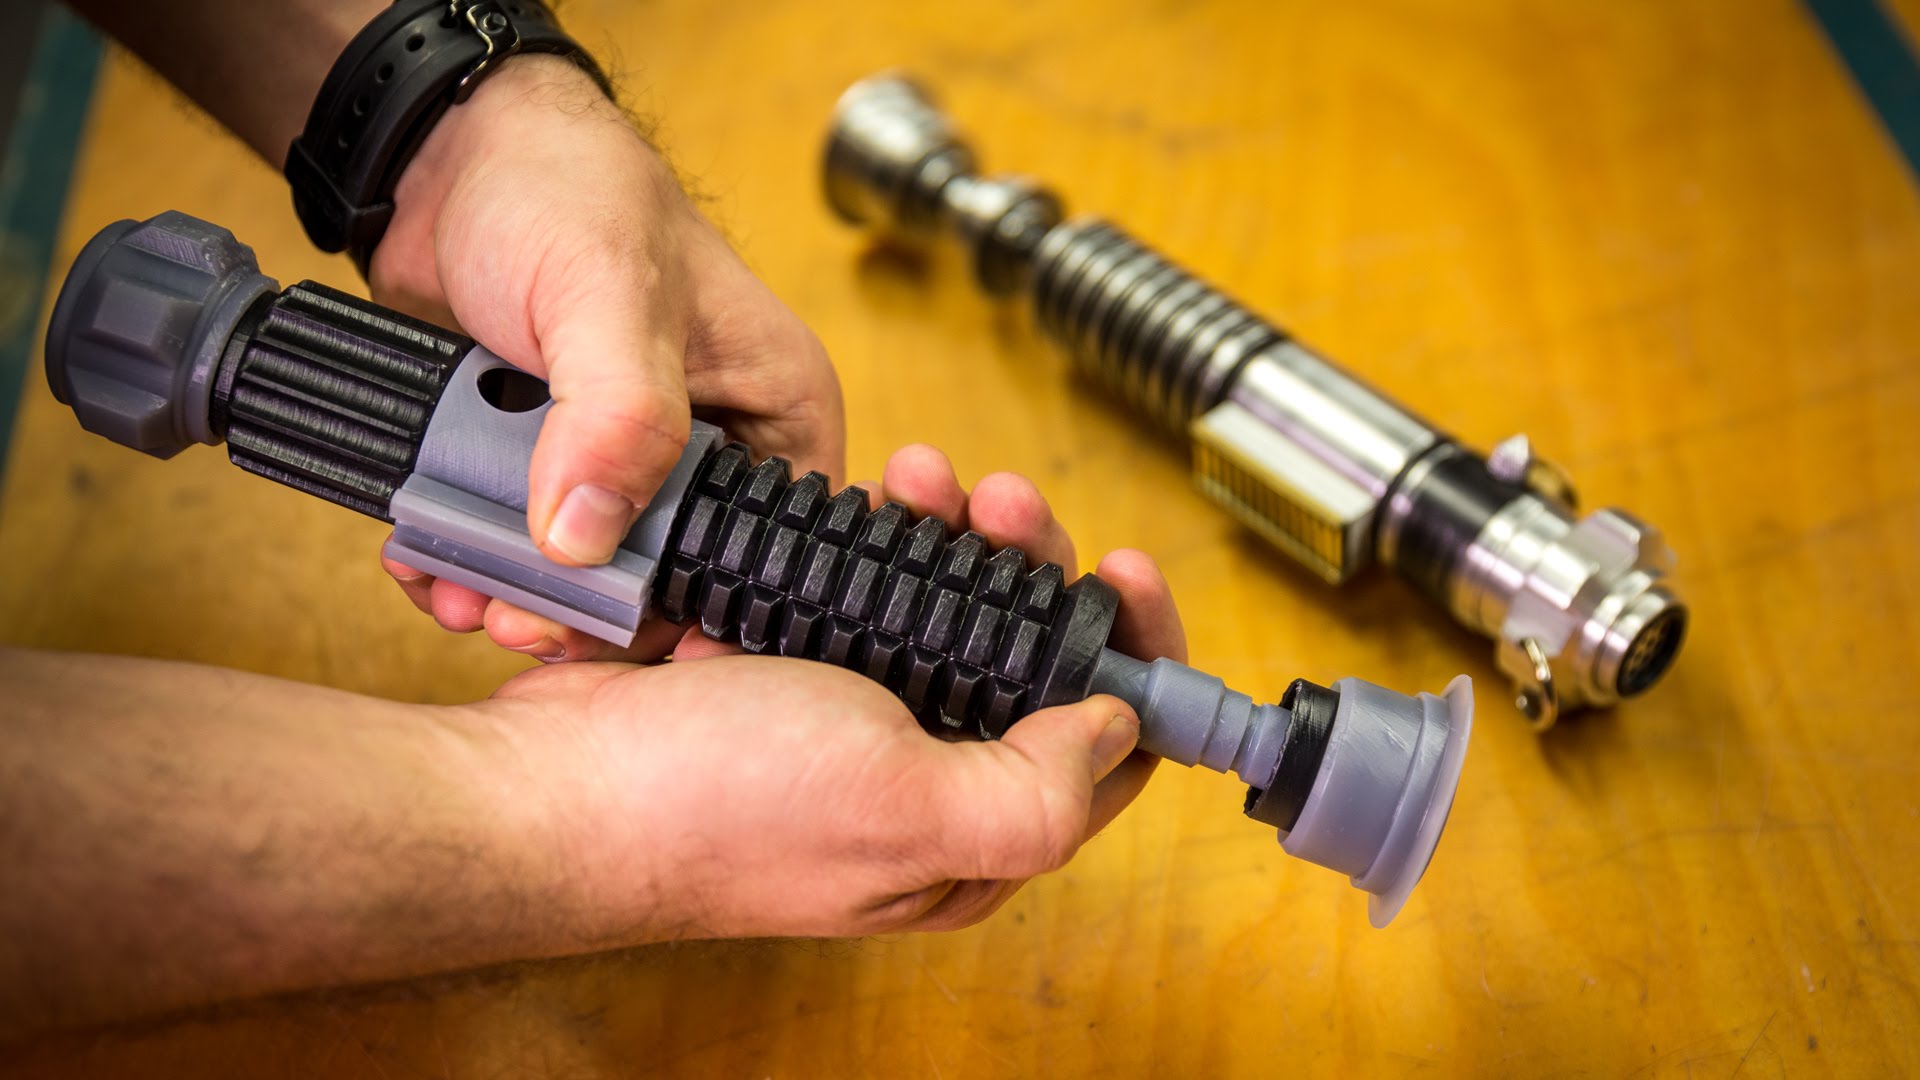 Expensive 3D Printer Owners Can Easily Create Their Own Sith Lightsaber Kit